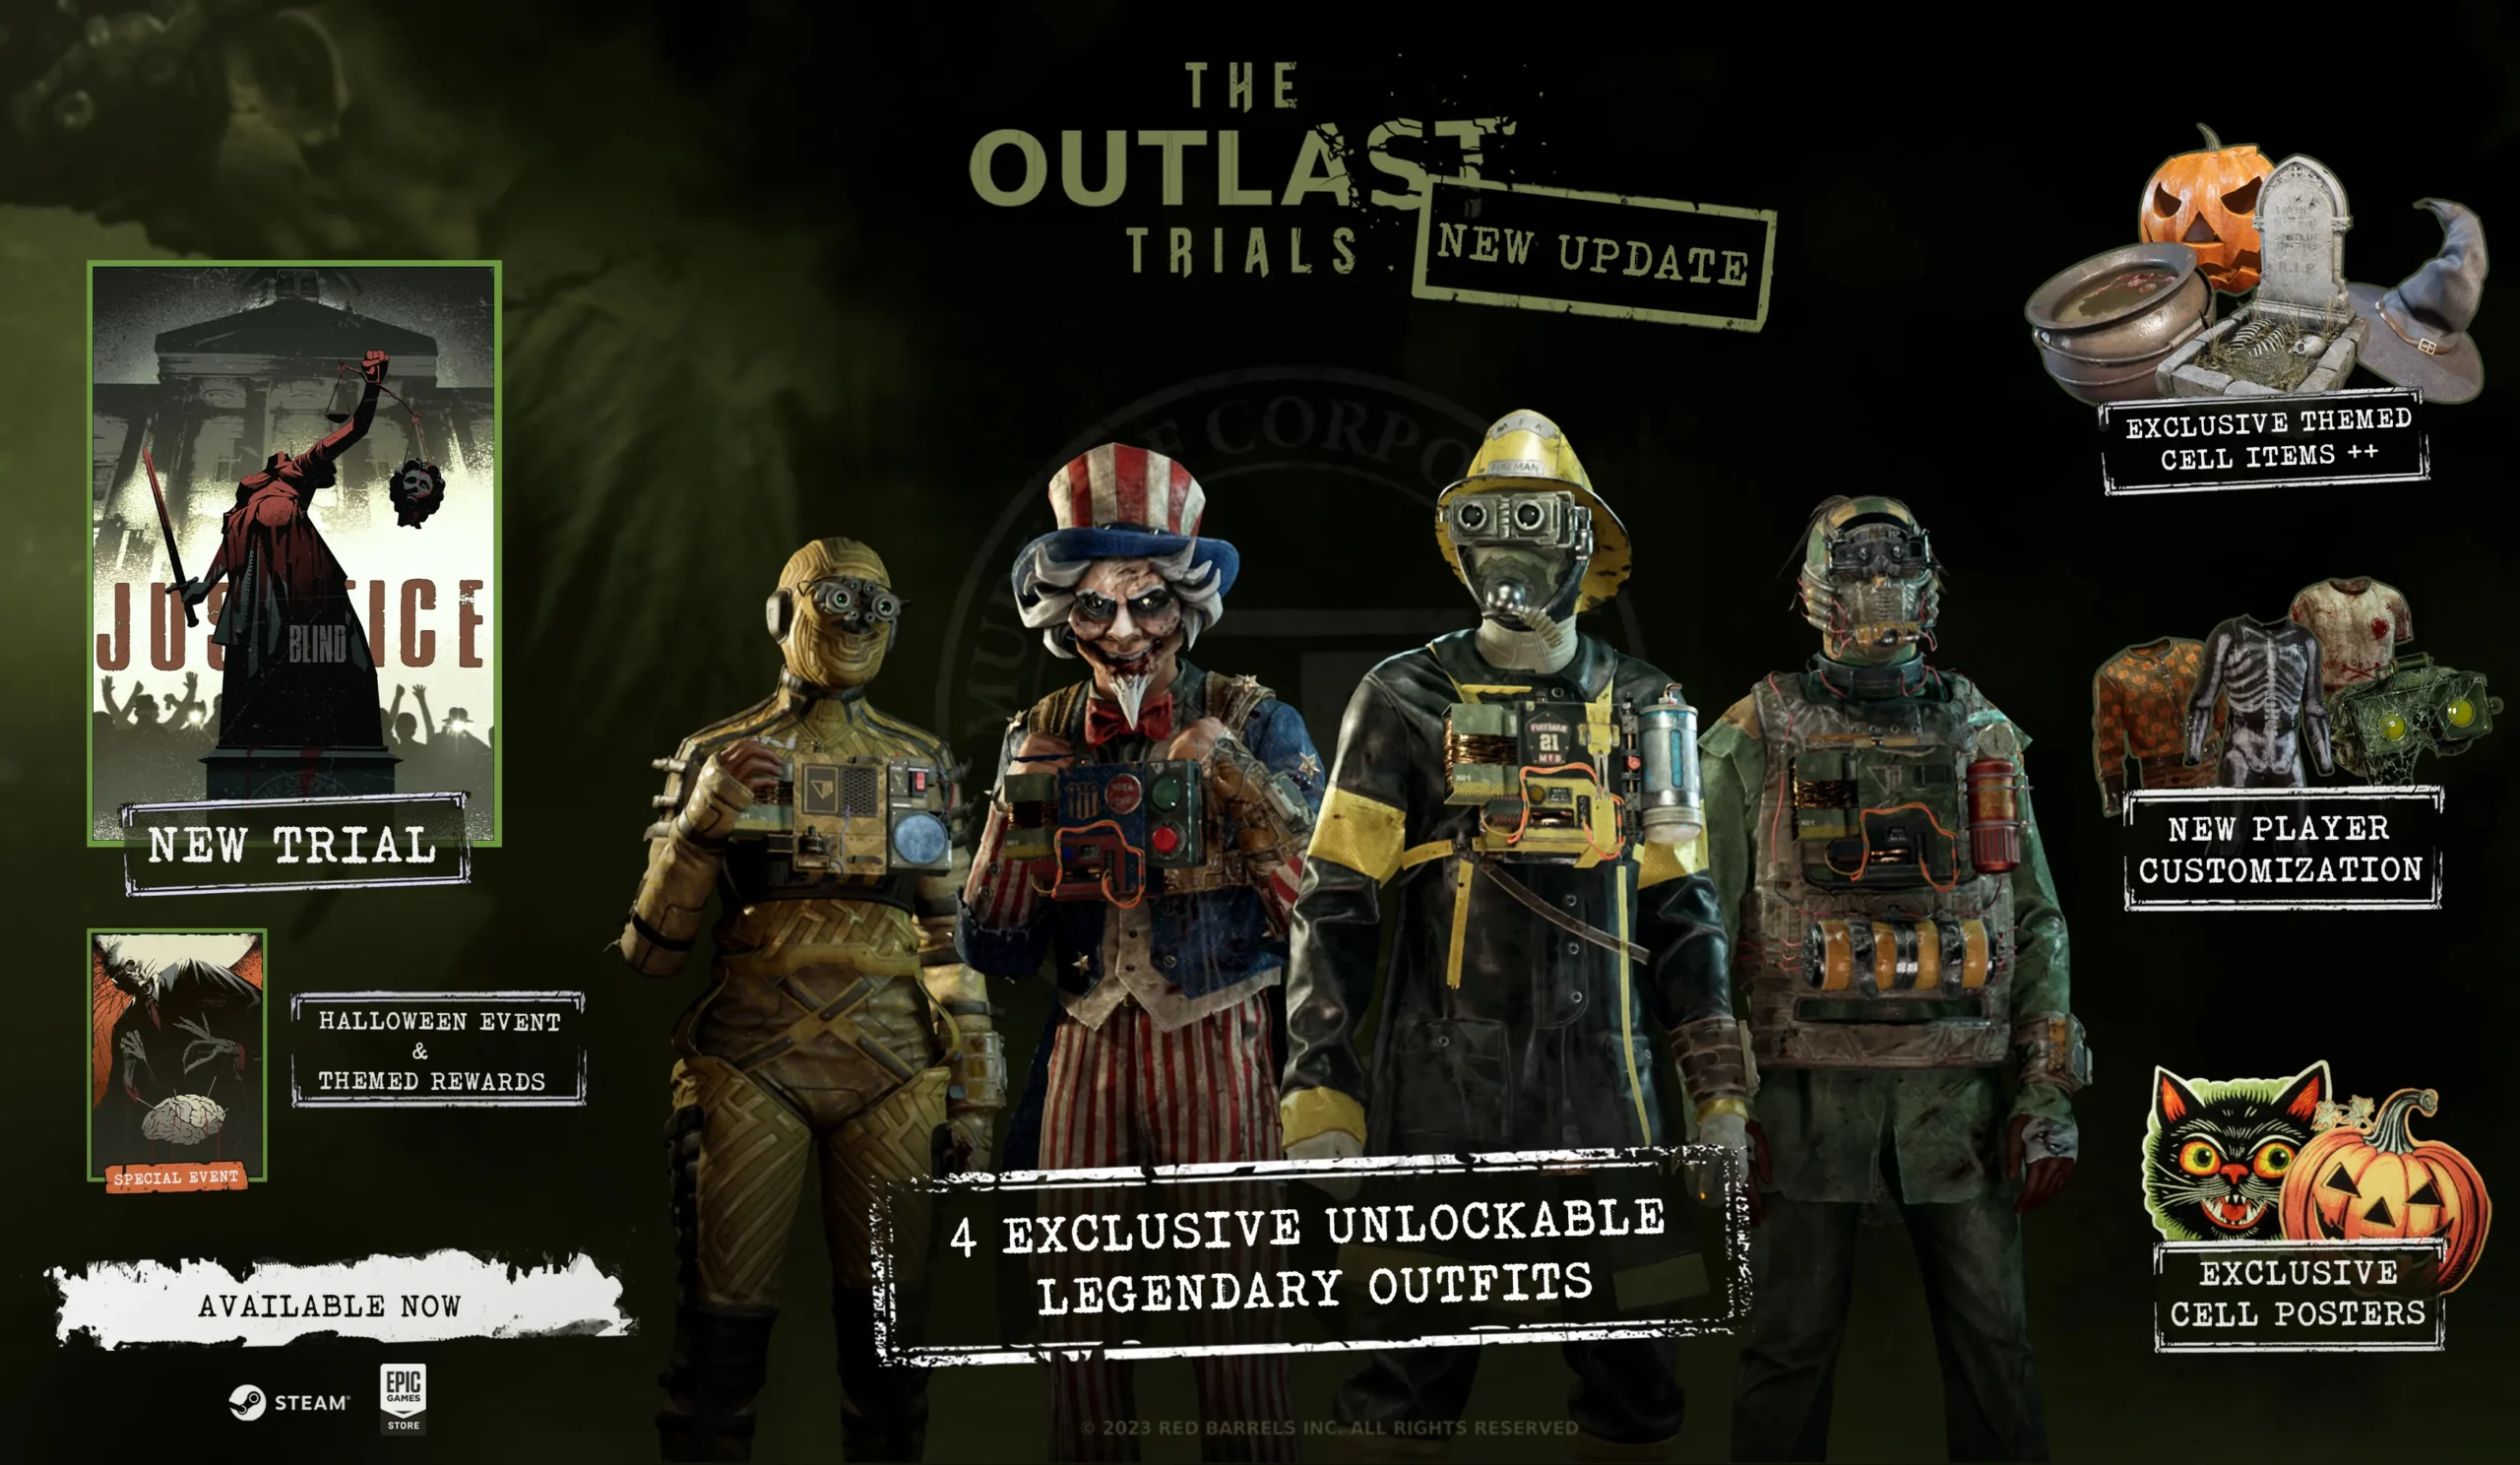 The Outlast trial update cover